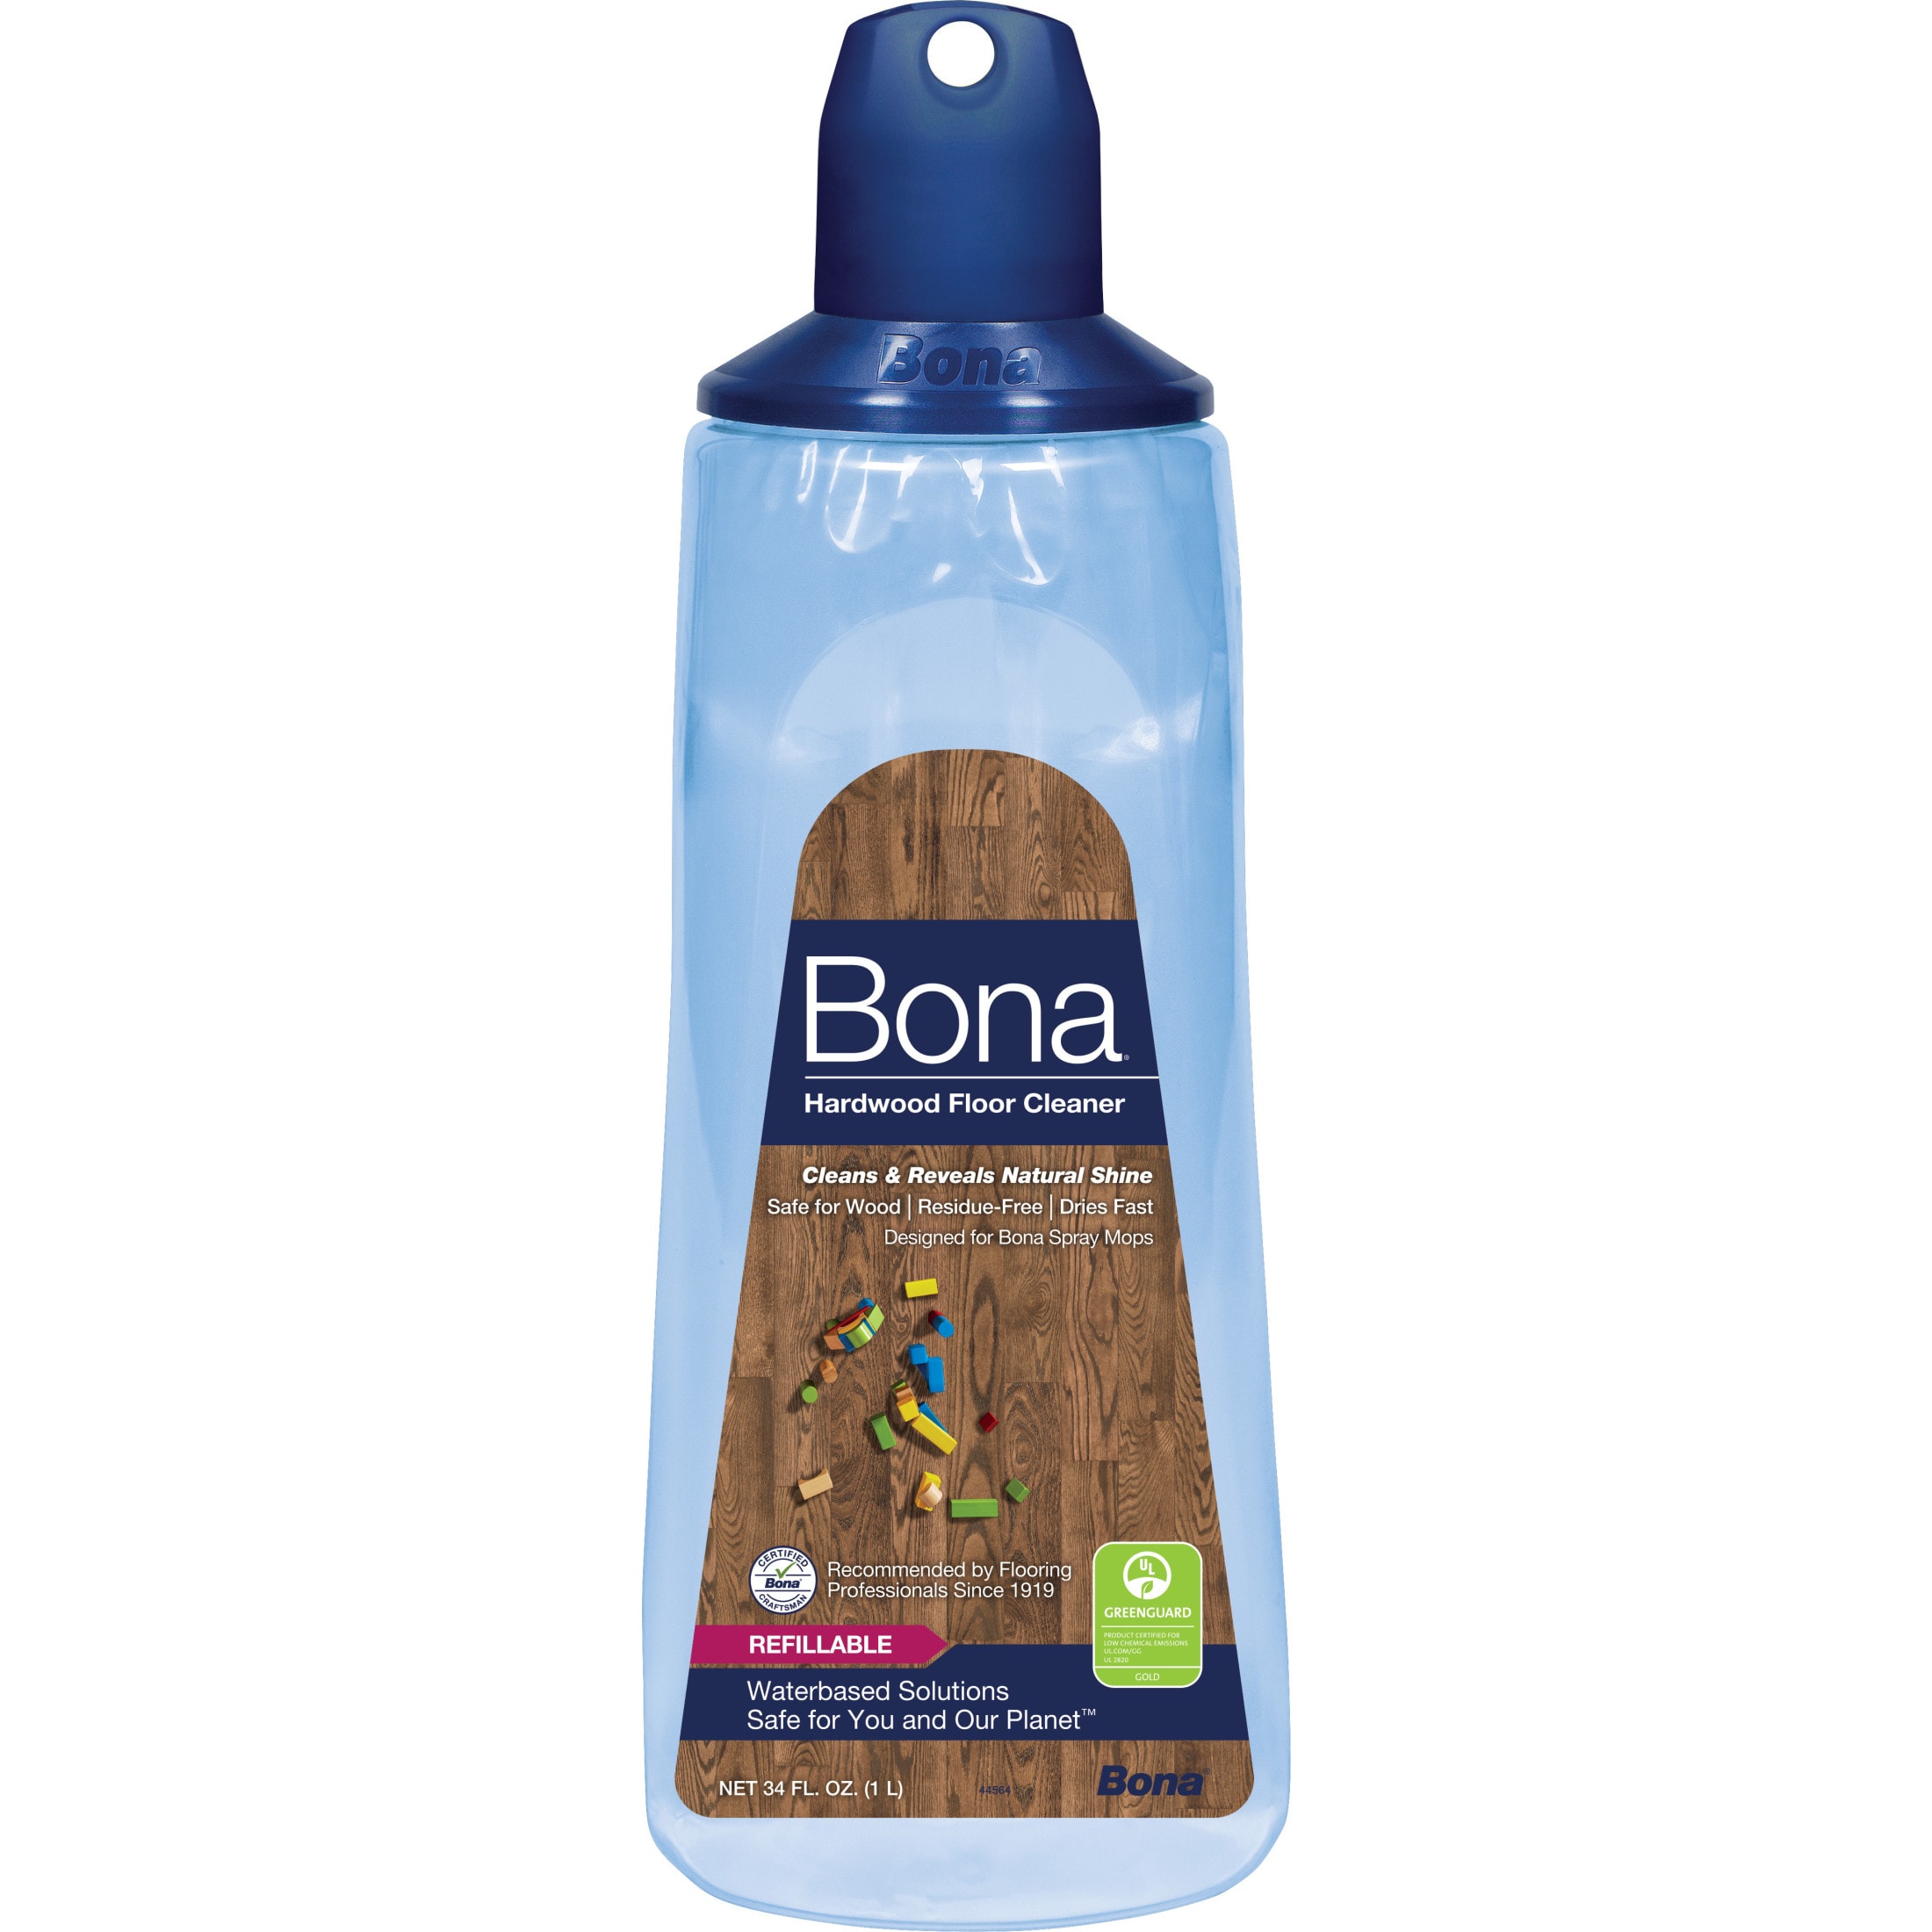 Top Bona Products for Cat Lovers 